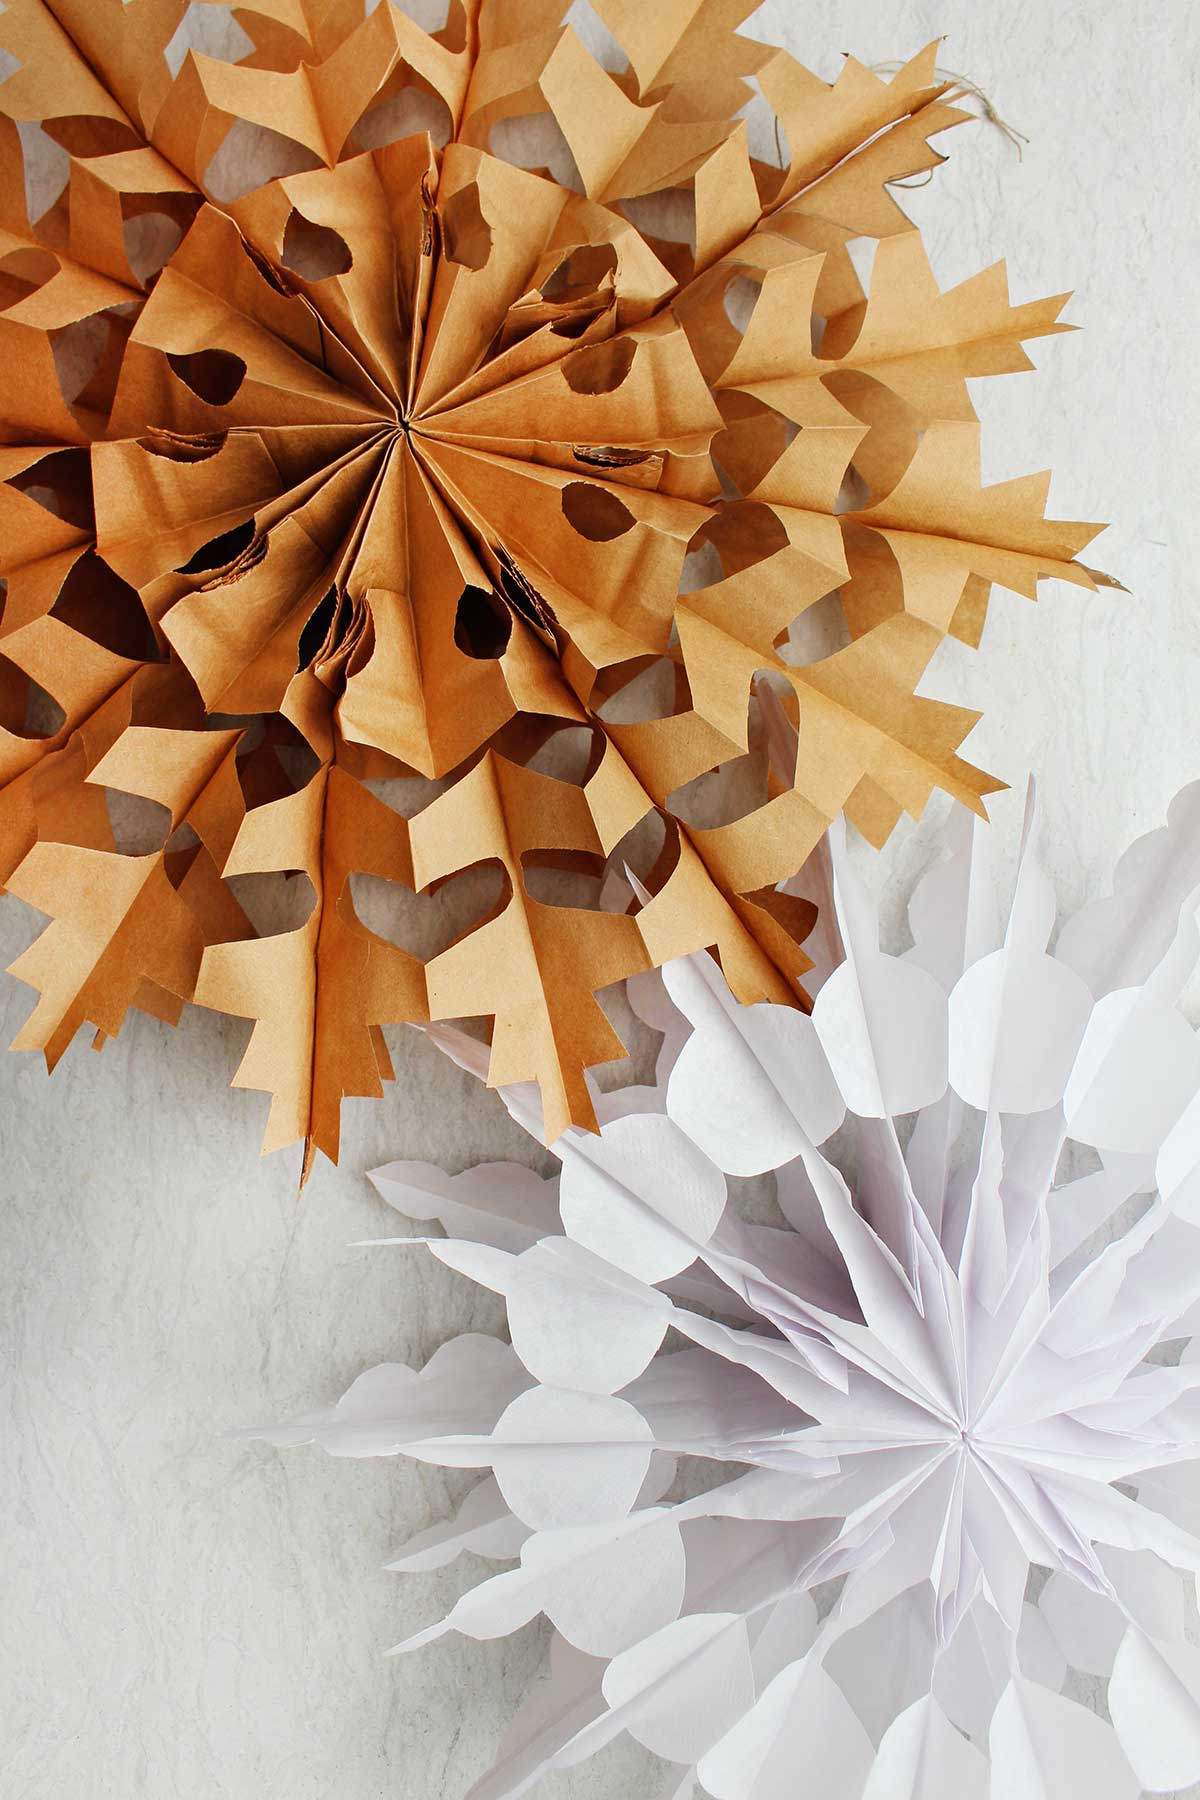 Two completed paper bag snowflake. One in brown and one in white.